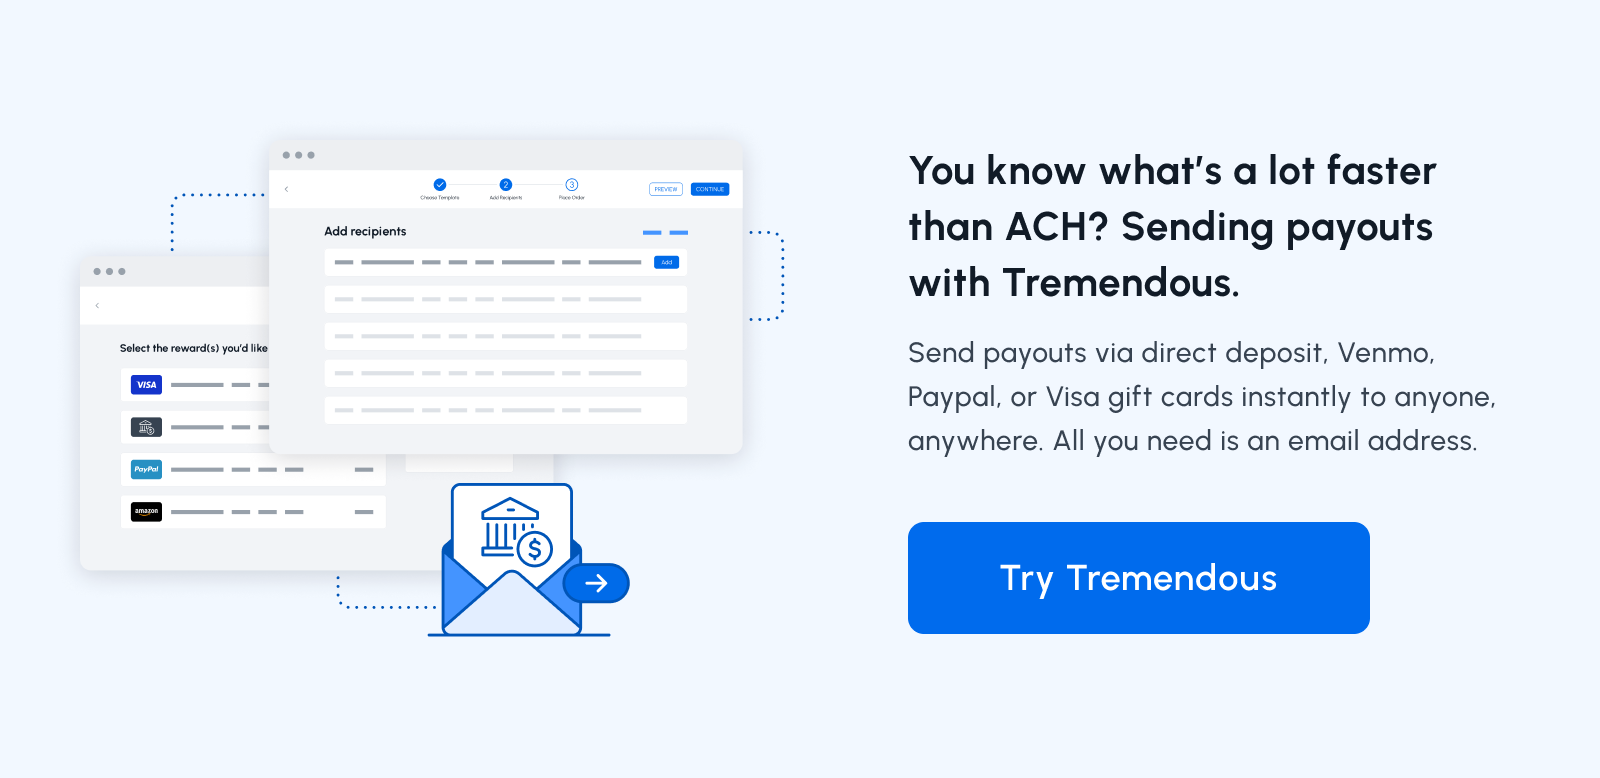 send payments faster with Tremendous